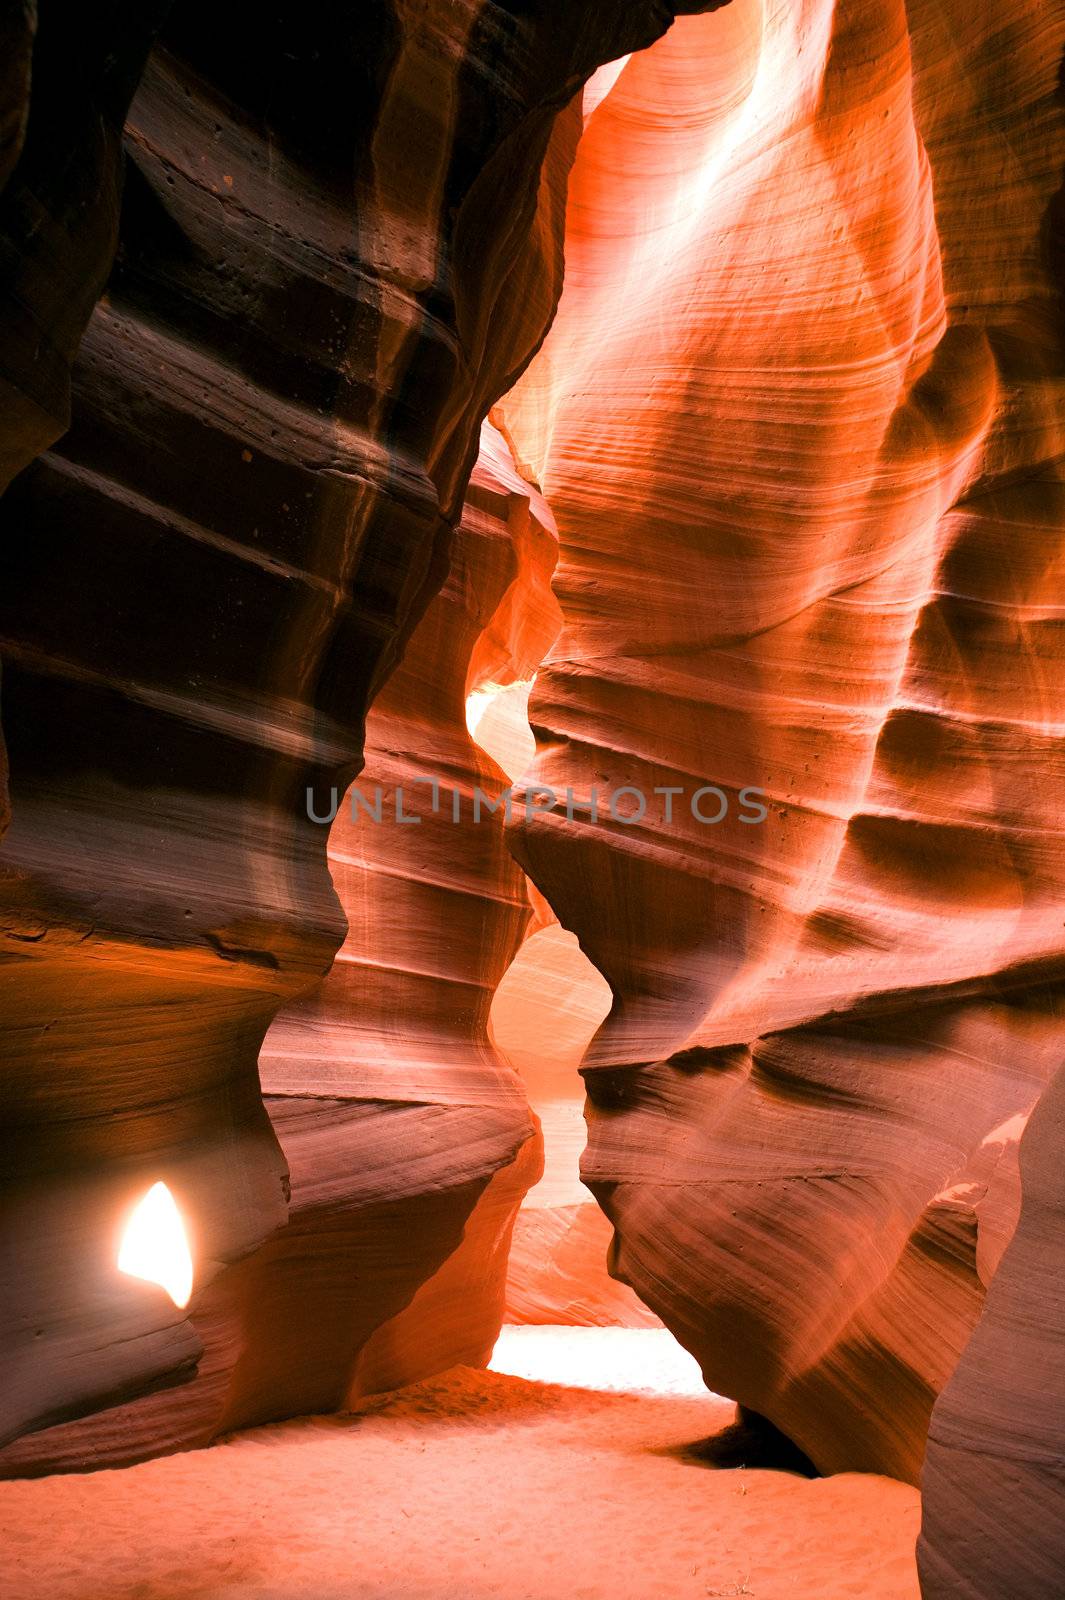 A sandstone slot canyon in Native American lands